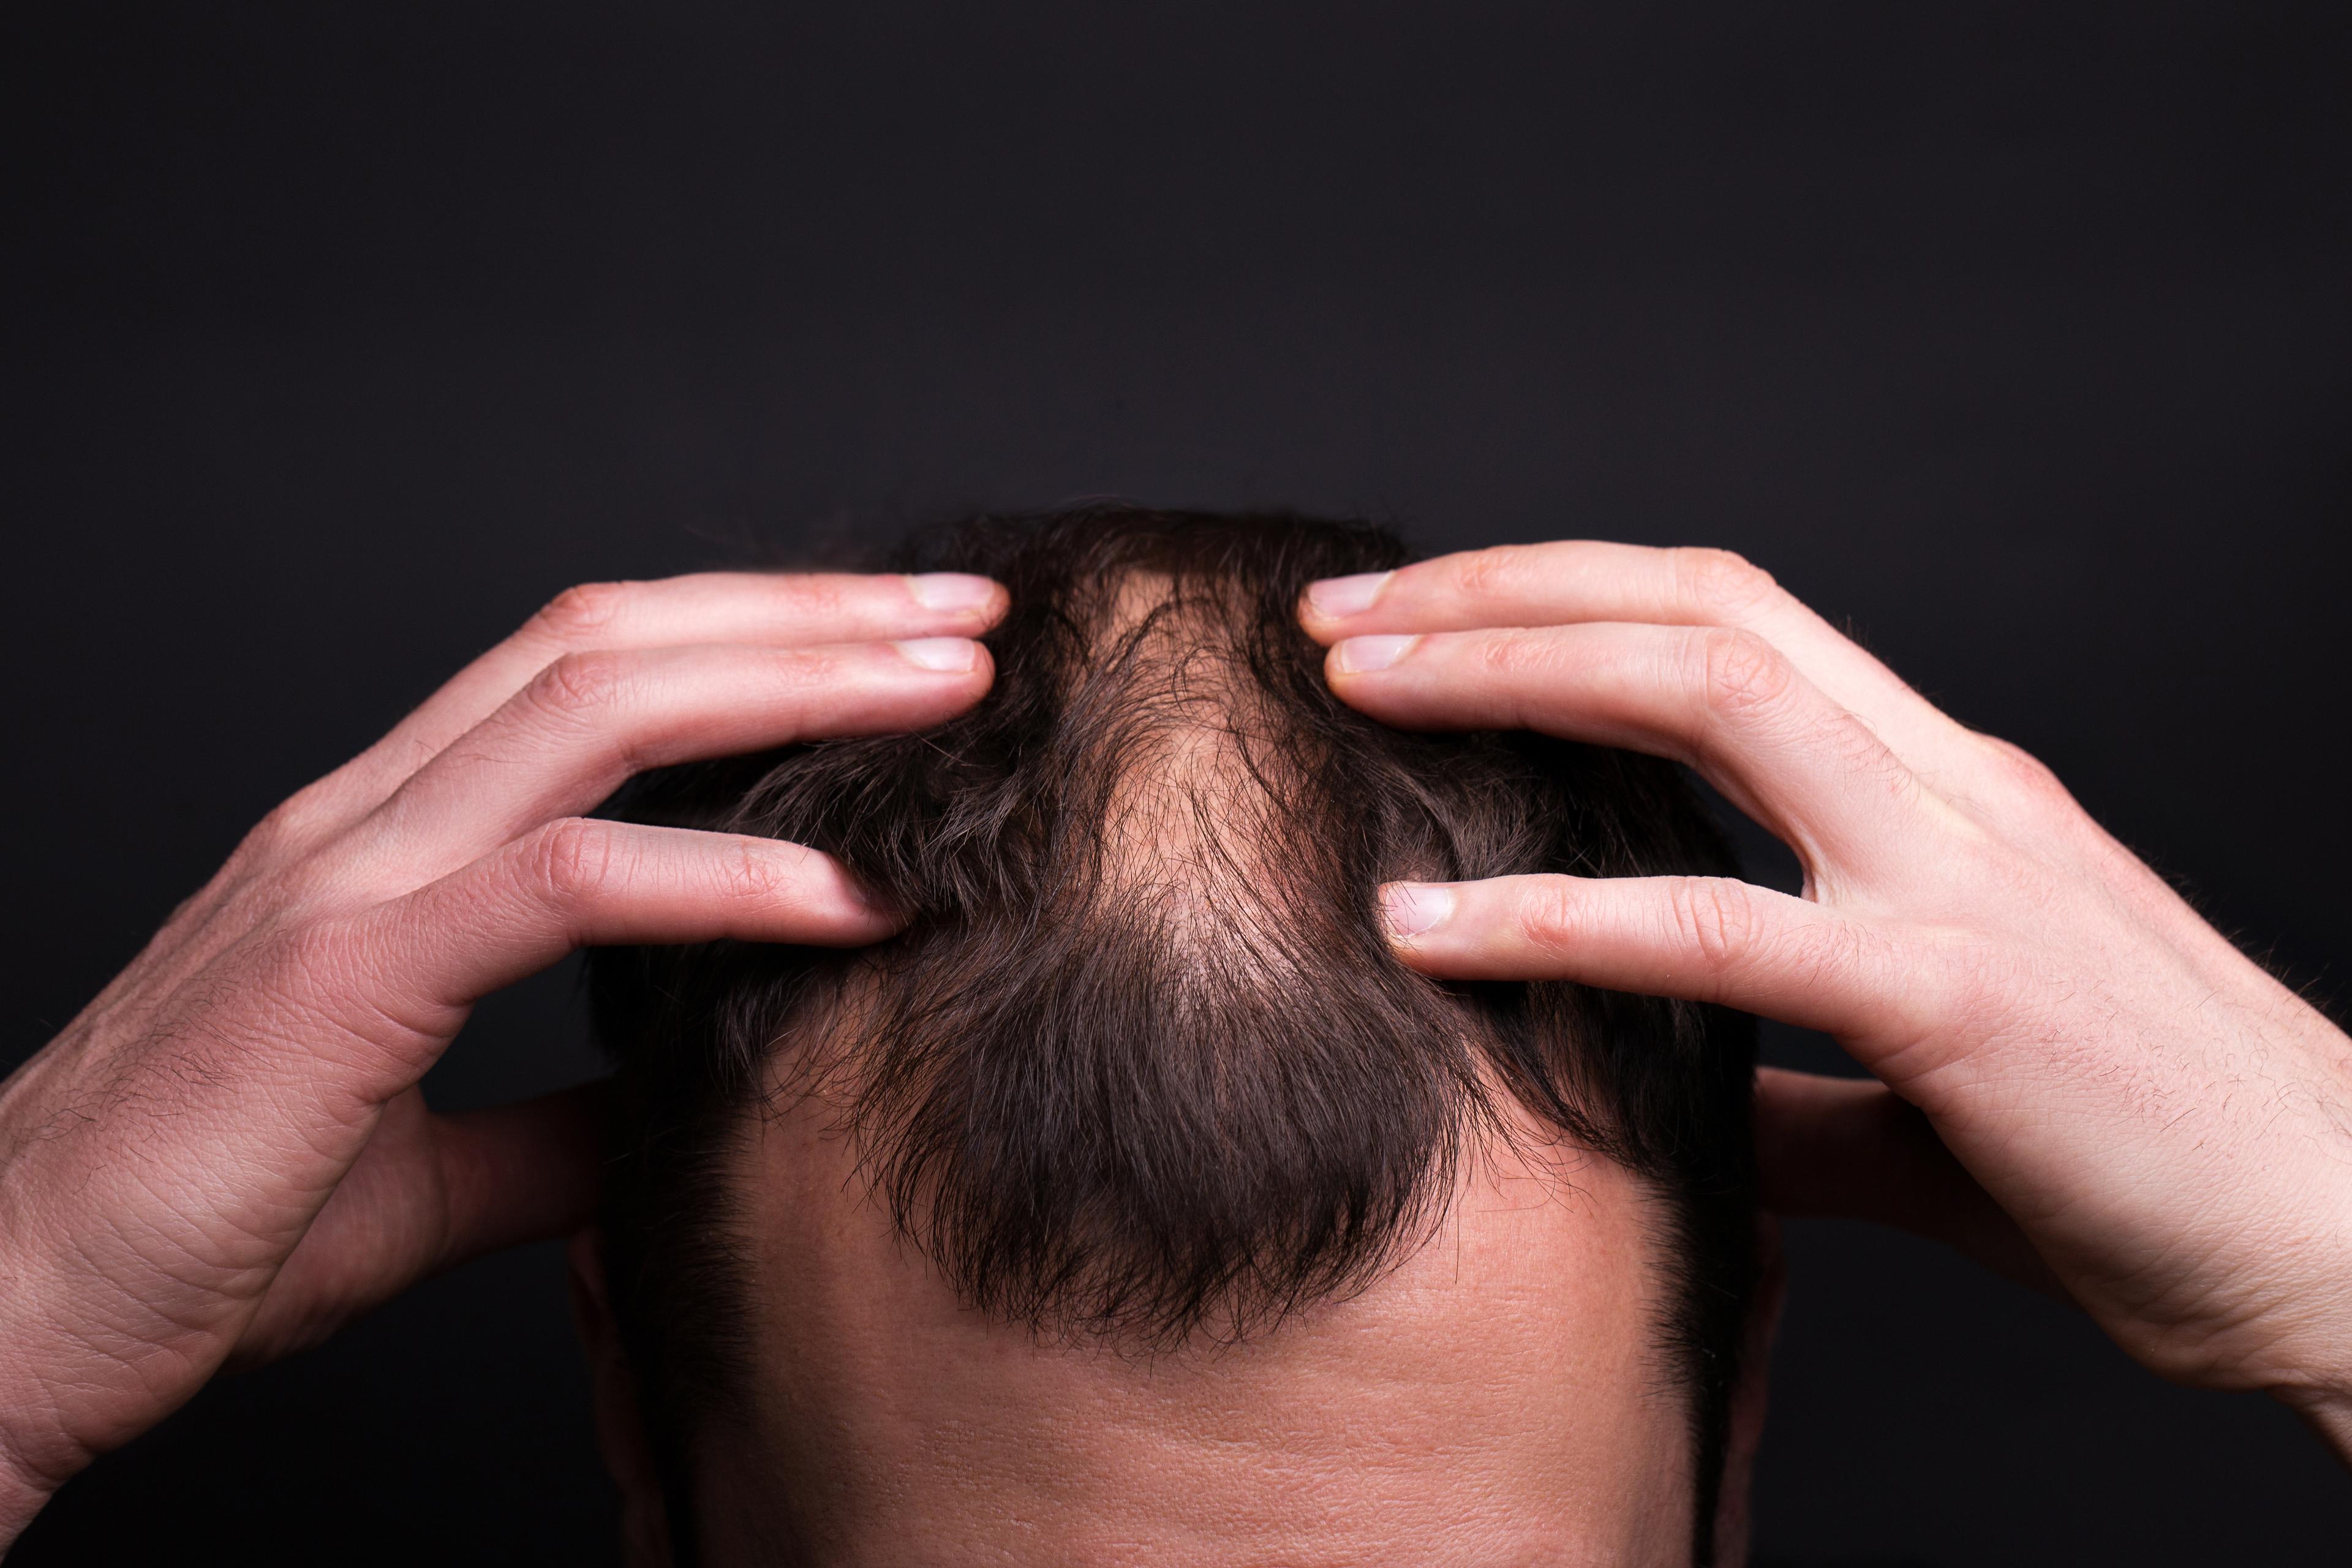 Brunette man with androgenetic alopecia touching his scalp.